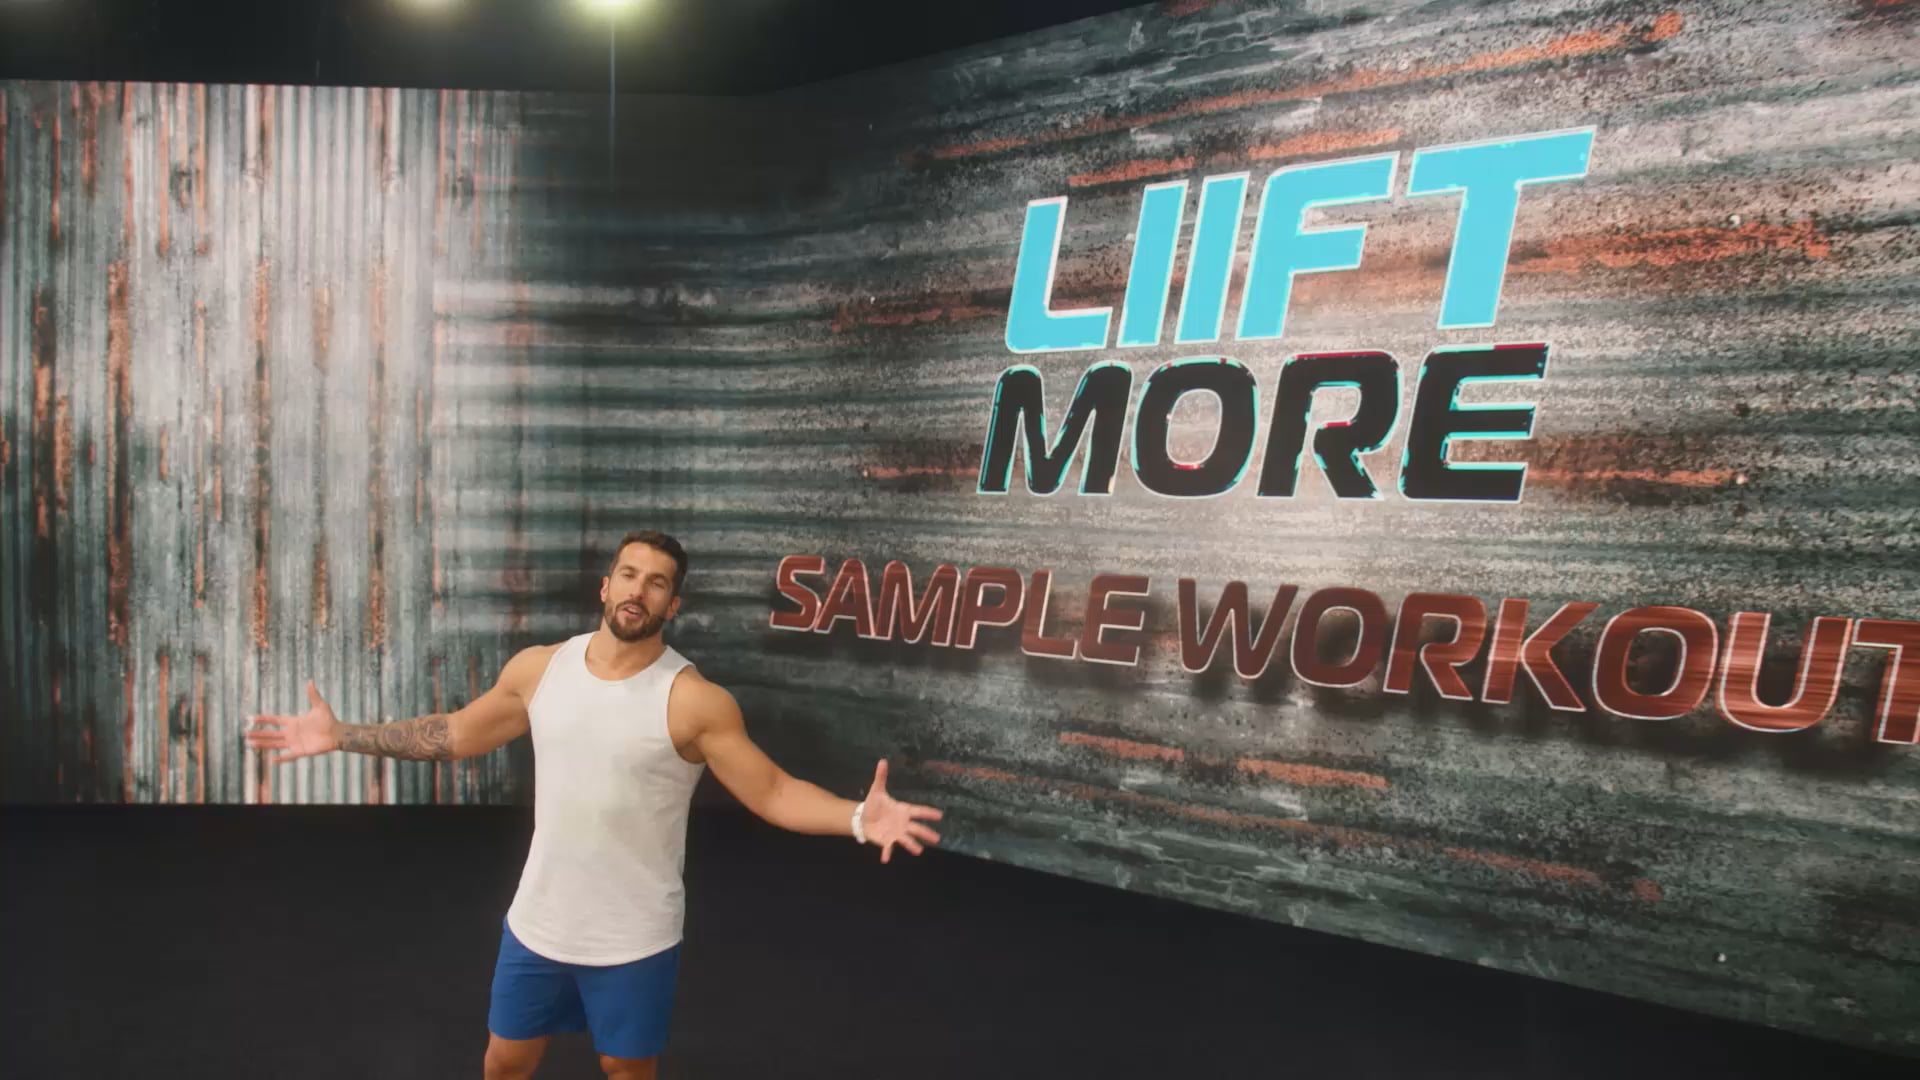 LIIFT MORE Sample Workout